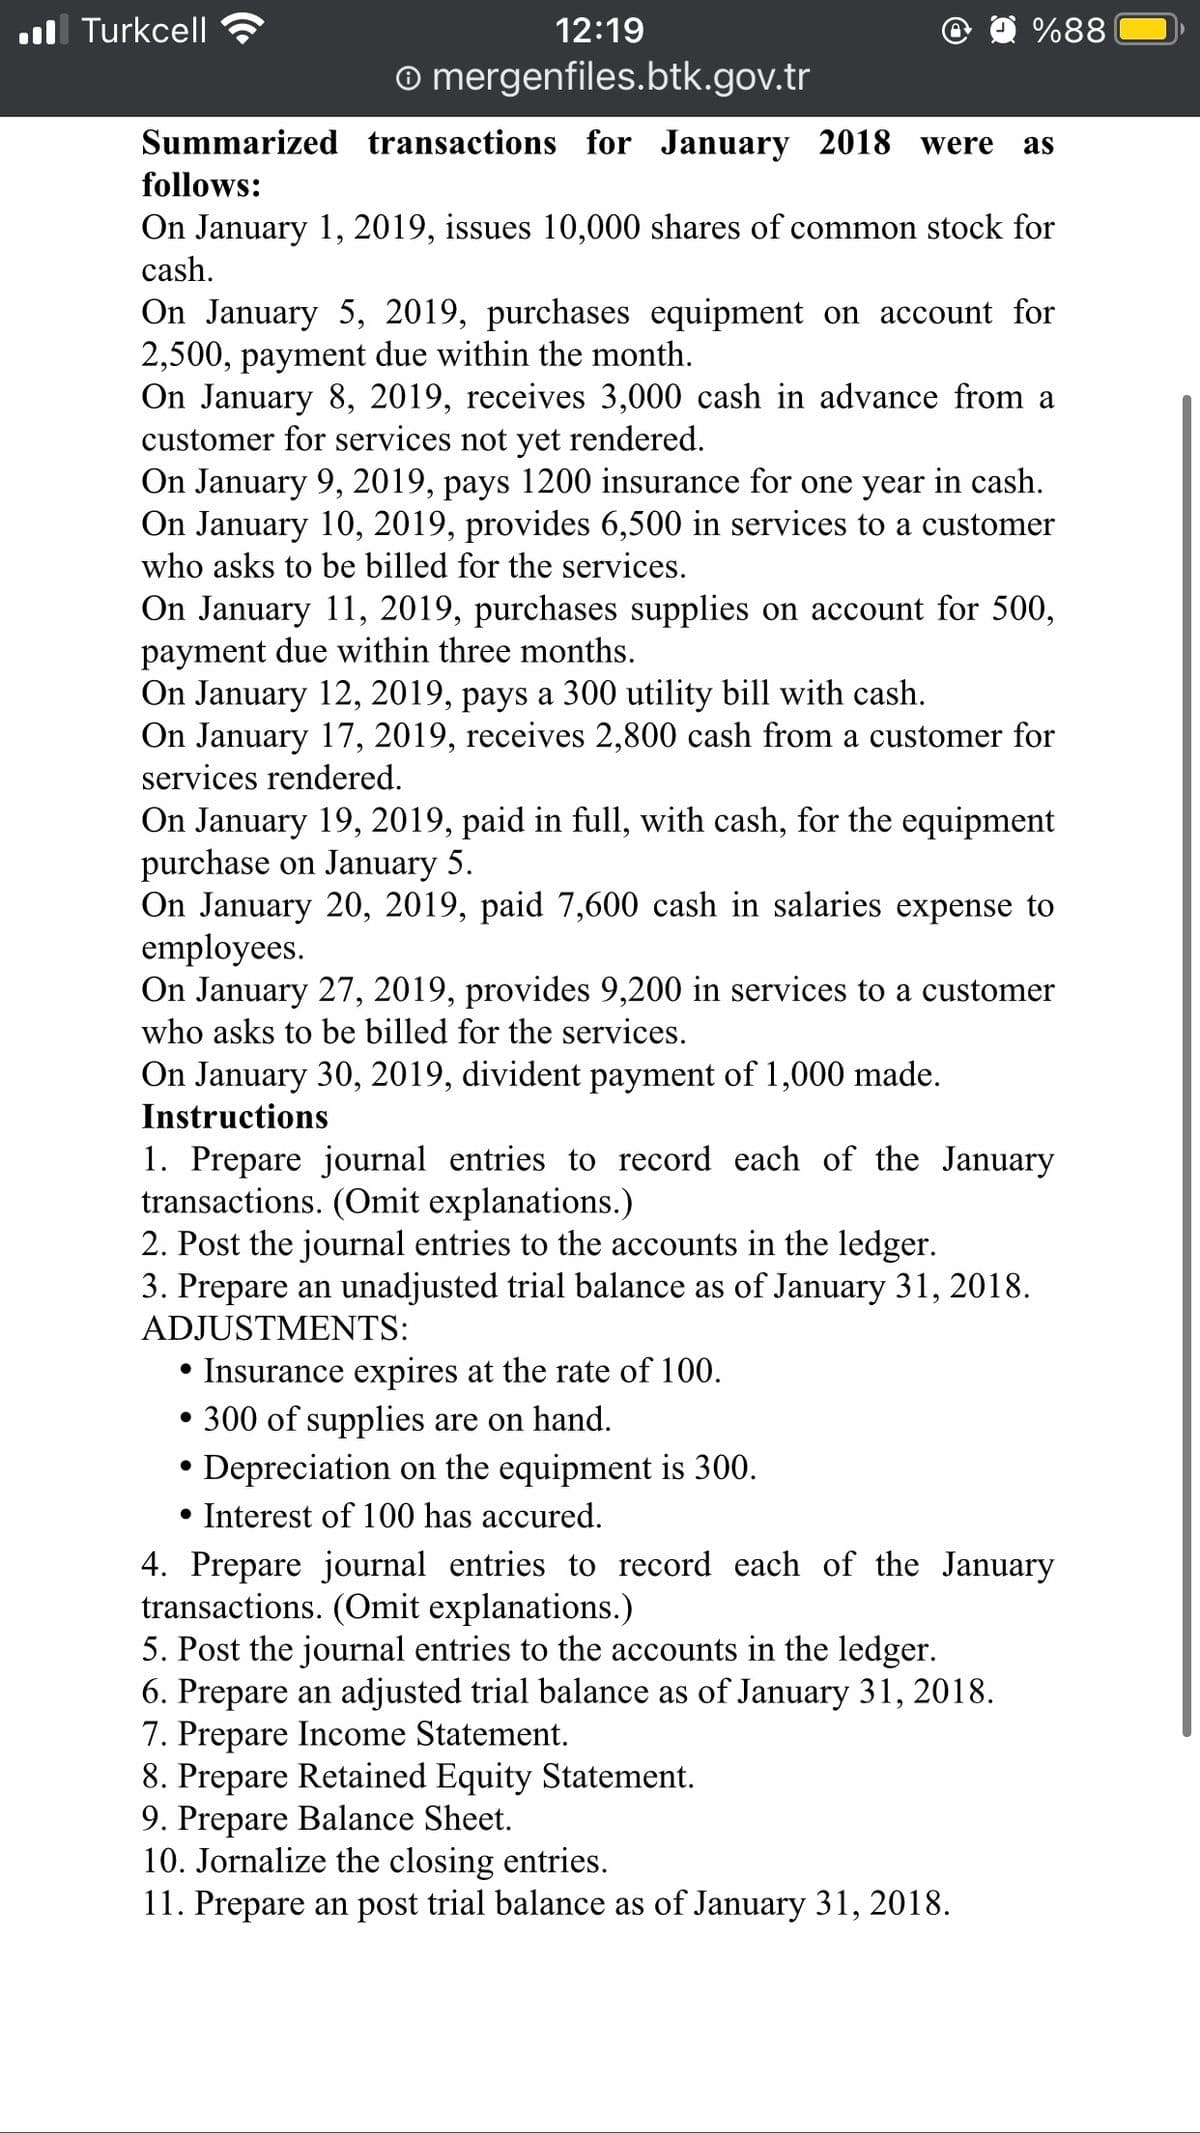 l Turkcell
12:19
%88
o mergenfiles.btk.gov.tr
Summarized transactions for January 2018 were
as
follows:
On January 1, 2019, issues 10,000 shares of common stock for
cash.
On January 5, 2019, purchases equipment on account for
2,500, payment due within the month.
On January 8, 2019, receives 3,000 cash in advance from a
customer for services not yet rendered.
On January 9, 2019, pays 1200 insurance for one year in cash.
On January 10, 2019, provides 6,500 in services to a customer
who asks to be billed for the services.
On January 11, 2019, purchases supplies on account for 500,
payment due within three months.
On January 12, 2019, pays a 300 utility bill with cash.
On January 17, 2019, receives 2,800 cash from a customer for
services rendered.
On January 19, 2019, paid in full, with cash, for the equipment
purchase on January 5.
On January 20, 2019, paid 7,600 cash in salaries expense to
employees.
On January 27, 2019, provides 9,200 in services to a customer
who asks to be billed for the services.
On January 30, 2019, divident payment of 1,000 made.
Instructions
1. Prepare journal entries to record each of the January
transactions. (Omit explanations.)
2. Post the journal entries to the accounts in the ledger.
3. Prepare an unadjusted trial balance as of January 31, 2018.
ADJUSTMENTS:
• Insurance expires at the rate of 100.
• 300 of supplies are on hand.
Depreciation on the equipment is 300.
• Interest of 100 has accured.
4. Prepare journal entries to record each of the January
transactions. (Omit explanations.)
5. Post the journal entries to the accounts in the ledger.
6. Prepare an adjusted trial balance as of January 31, 2018.
7. Prepare Income Statement.
8. Prepare Retained Equity Statement.
9. Prepare Balance Sheet.
10. Jornalize the closing entries.
11. Prepare an post trial balance as of January 31, 2018.
